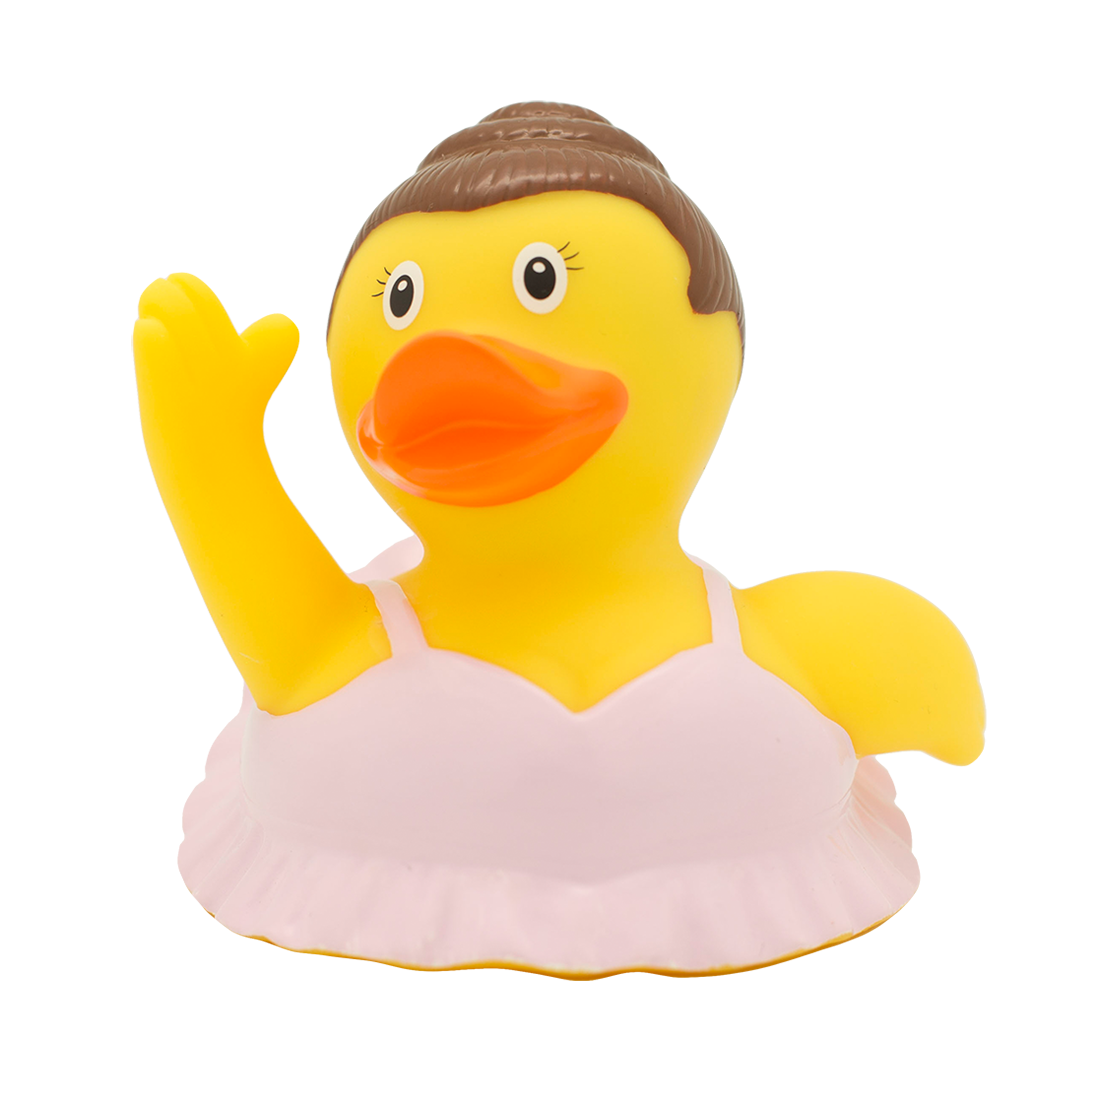 LILALU - SHARE HAPPINESS - Car driver female rubber duck - design